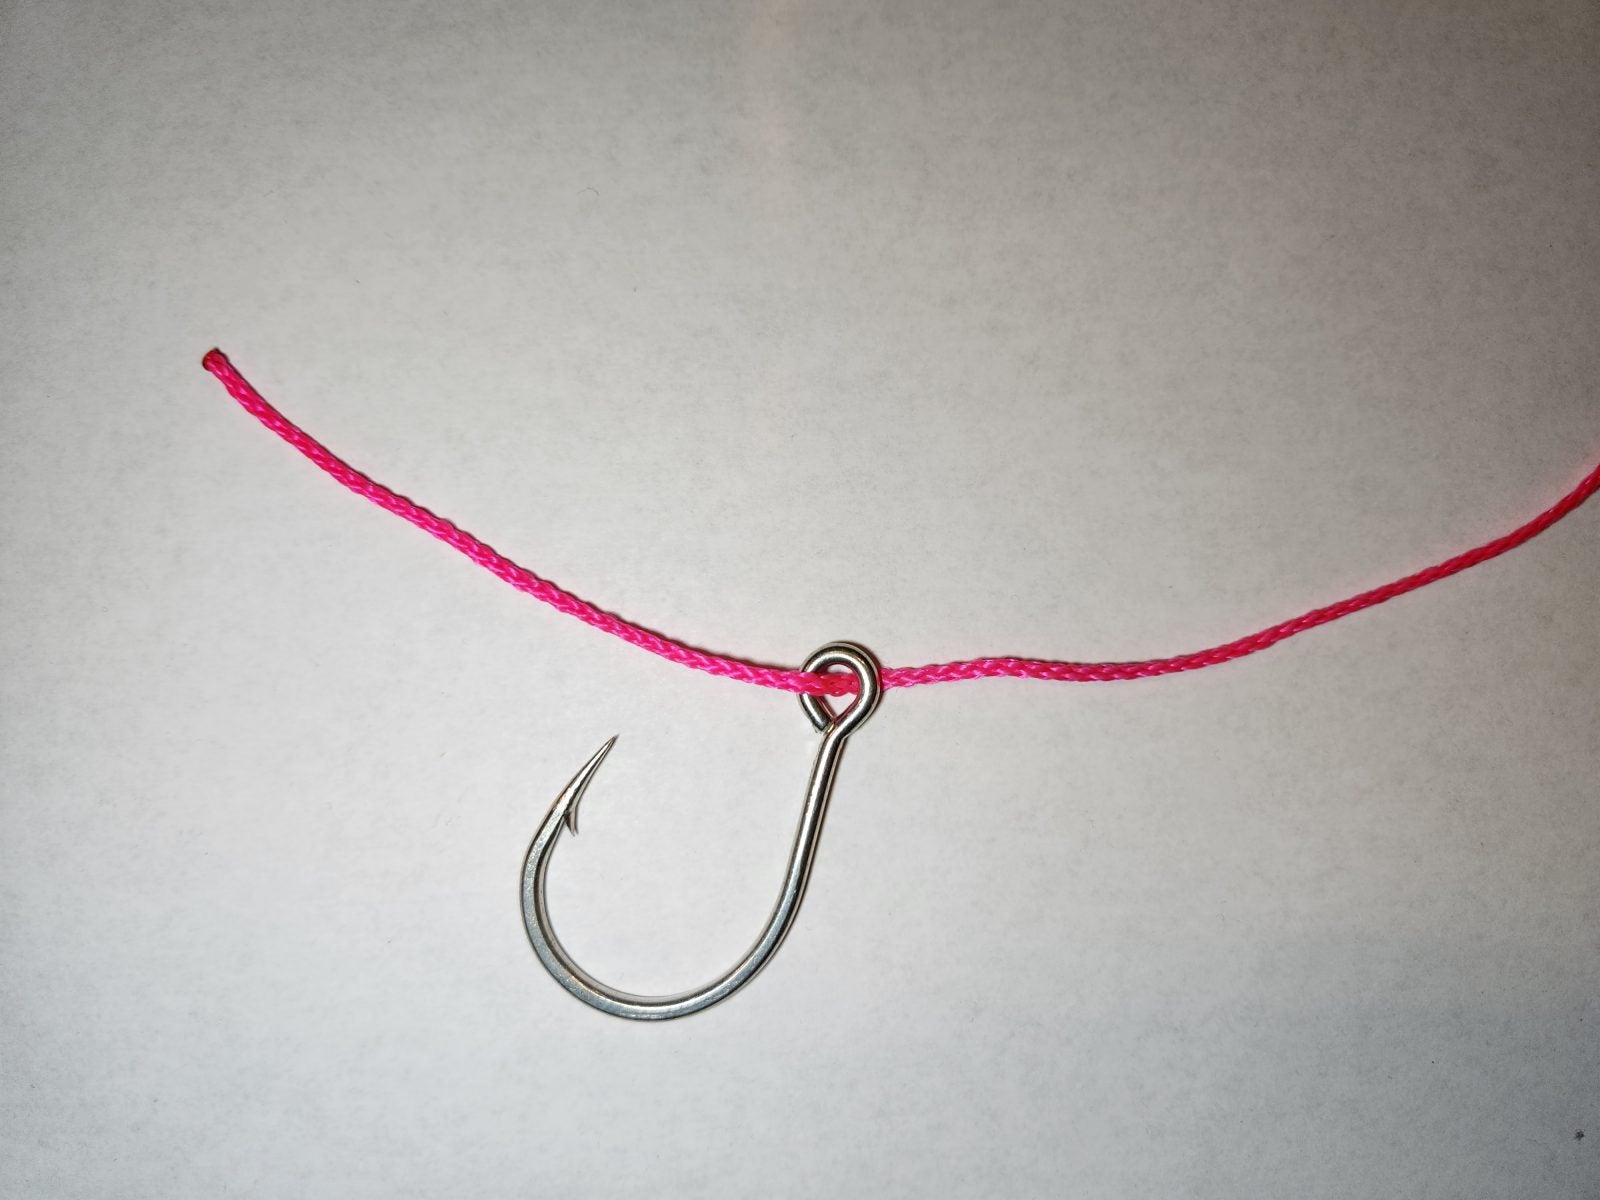 Are You Nuts? Know your Fishing Knots! – TN Knot